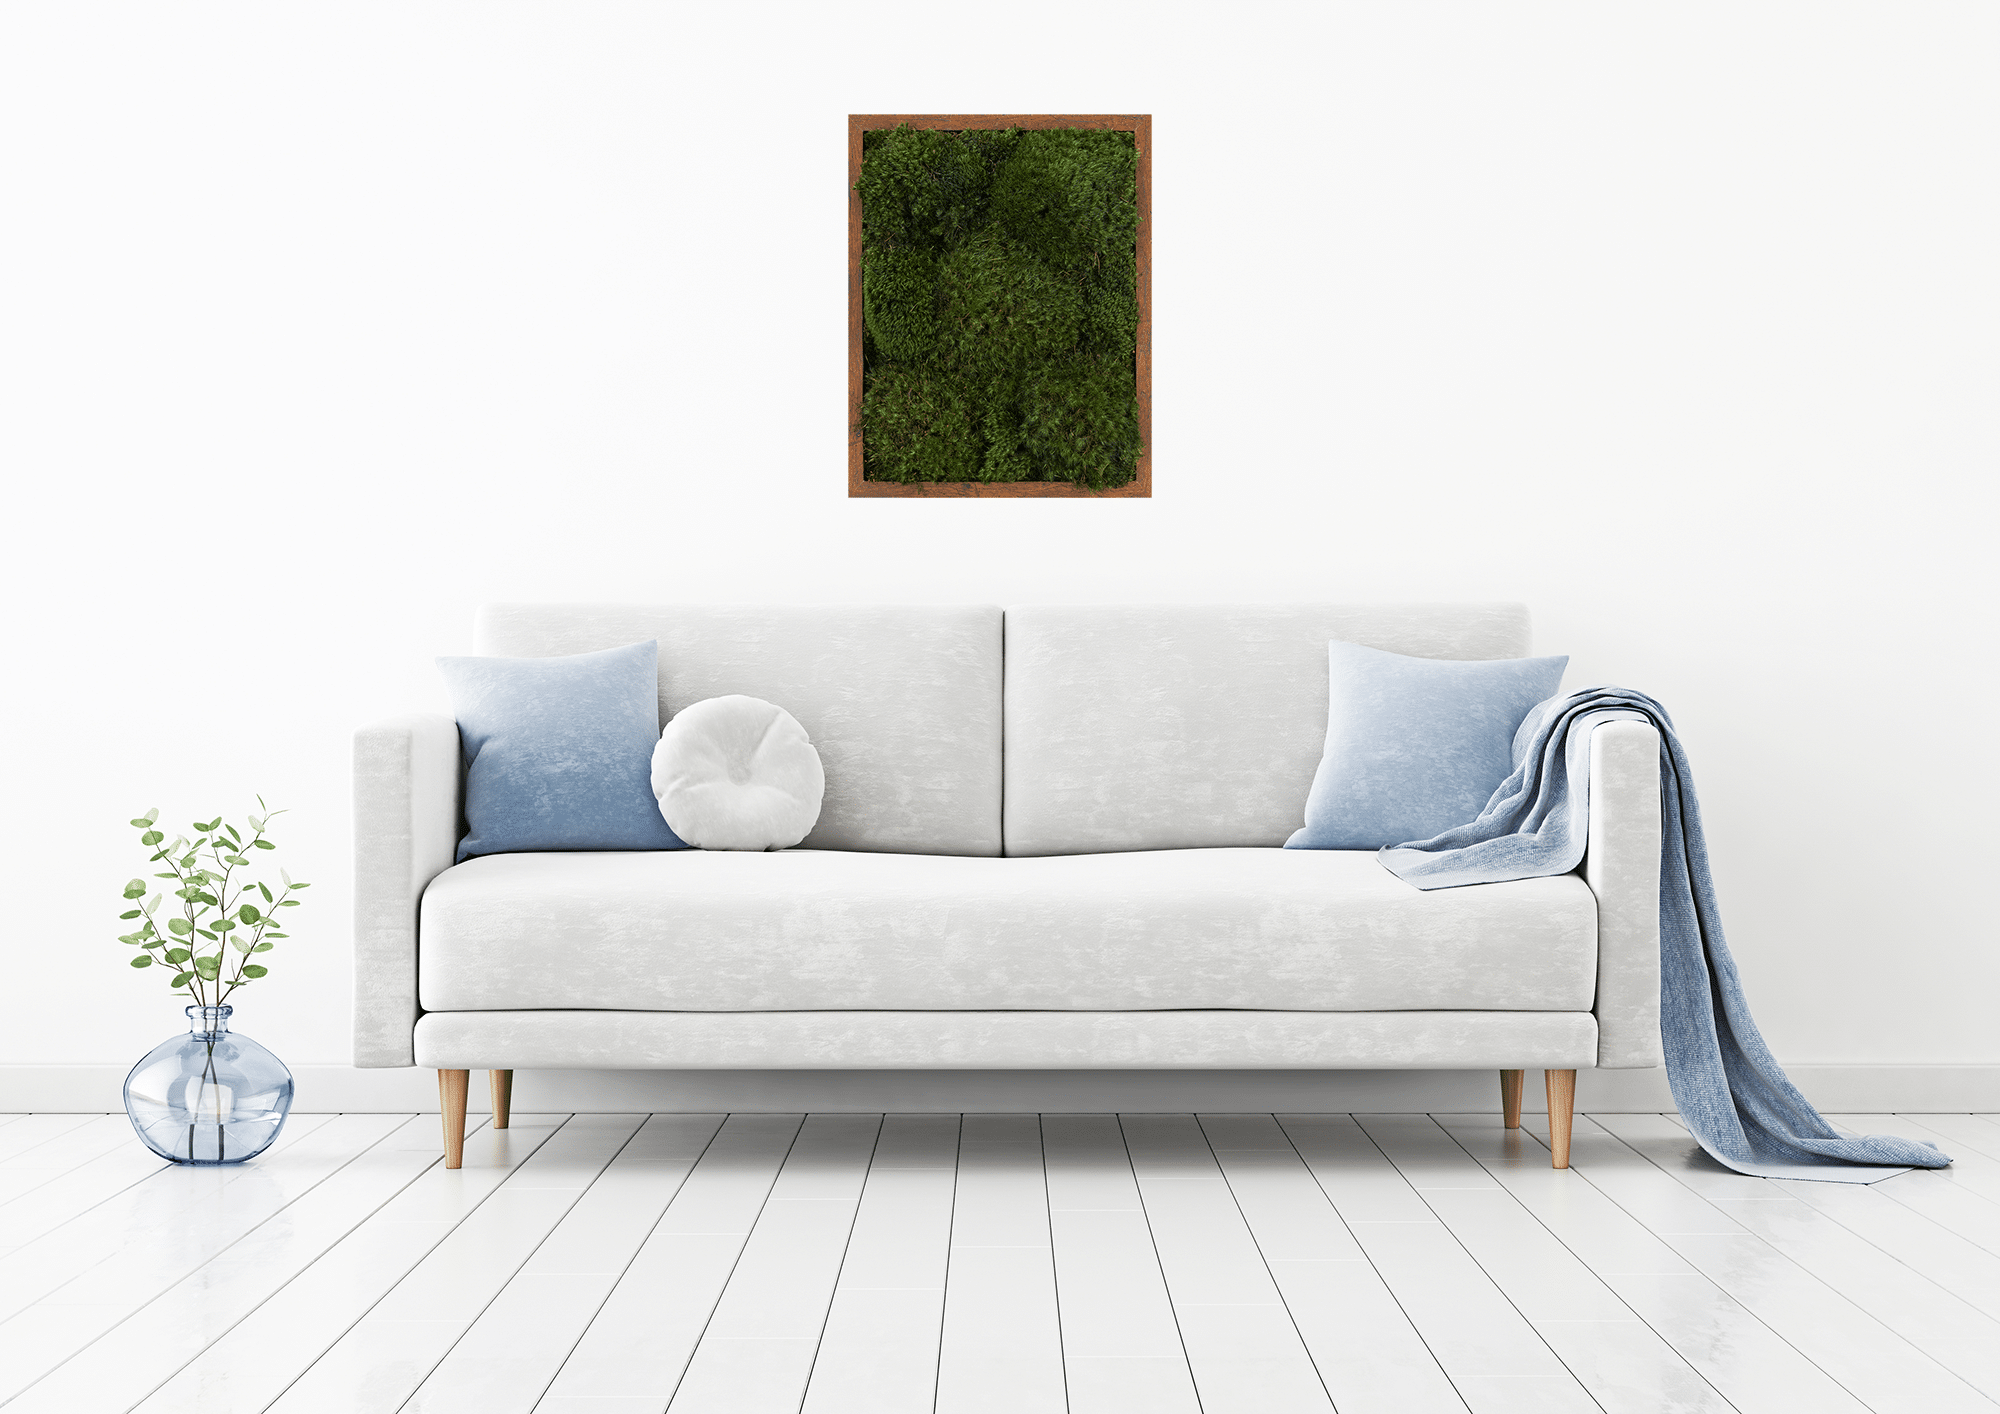 Moss Pure: Live Moss Walls and Decor For Your Space.